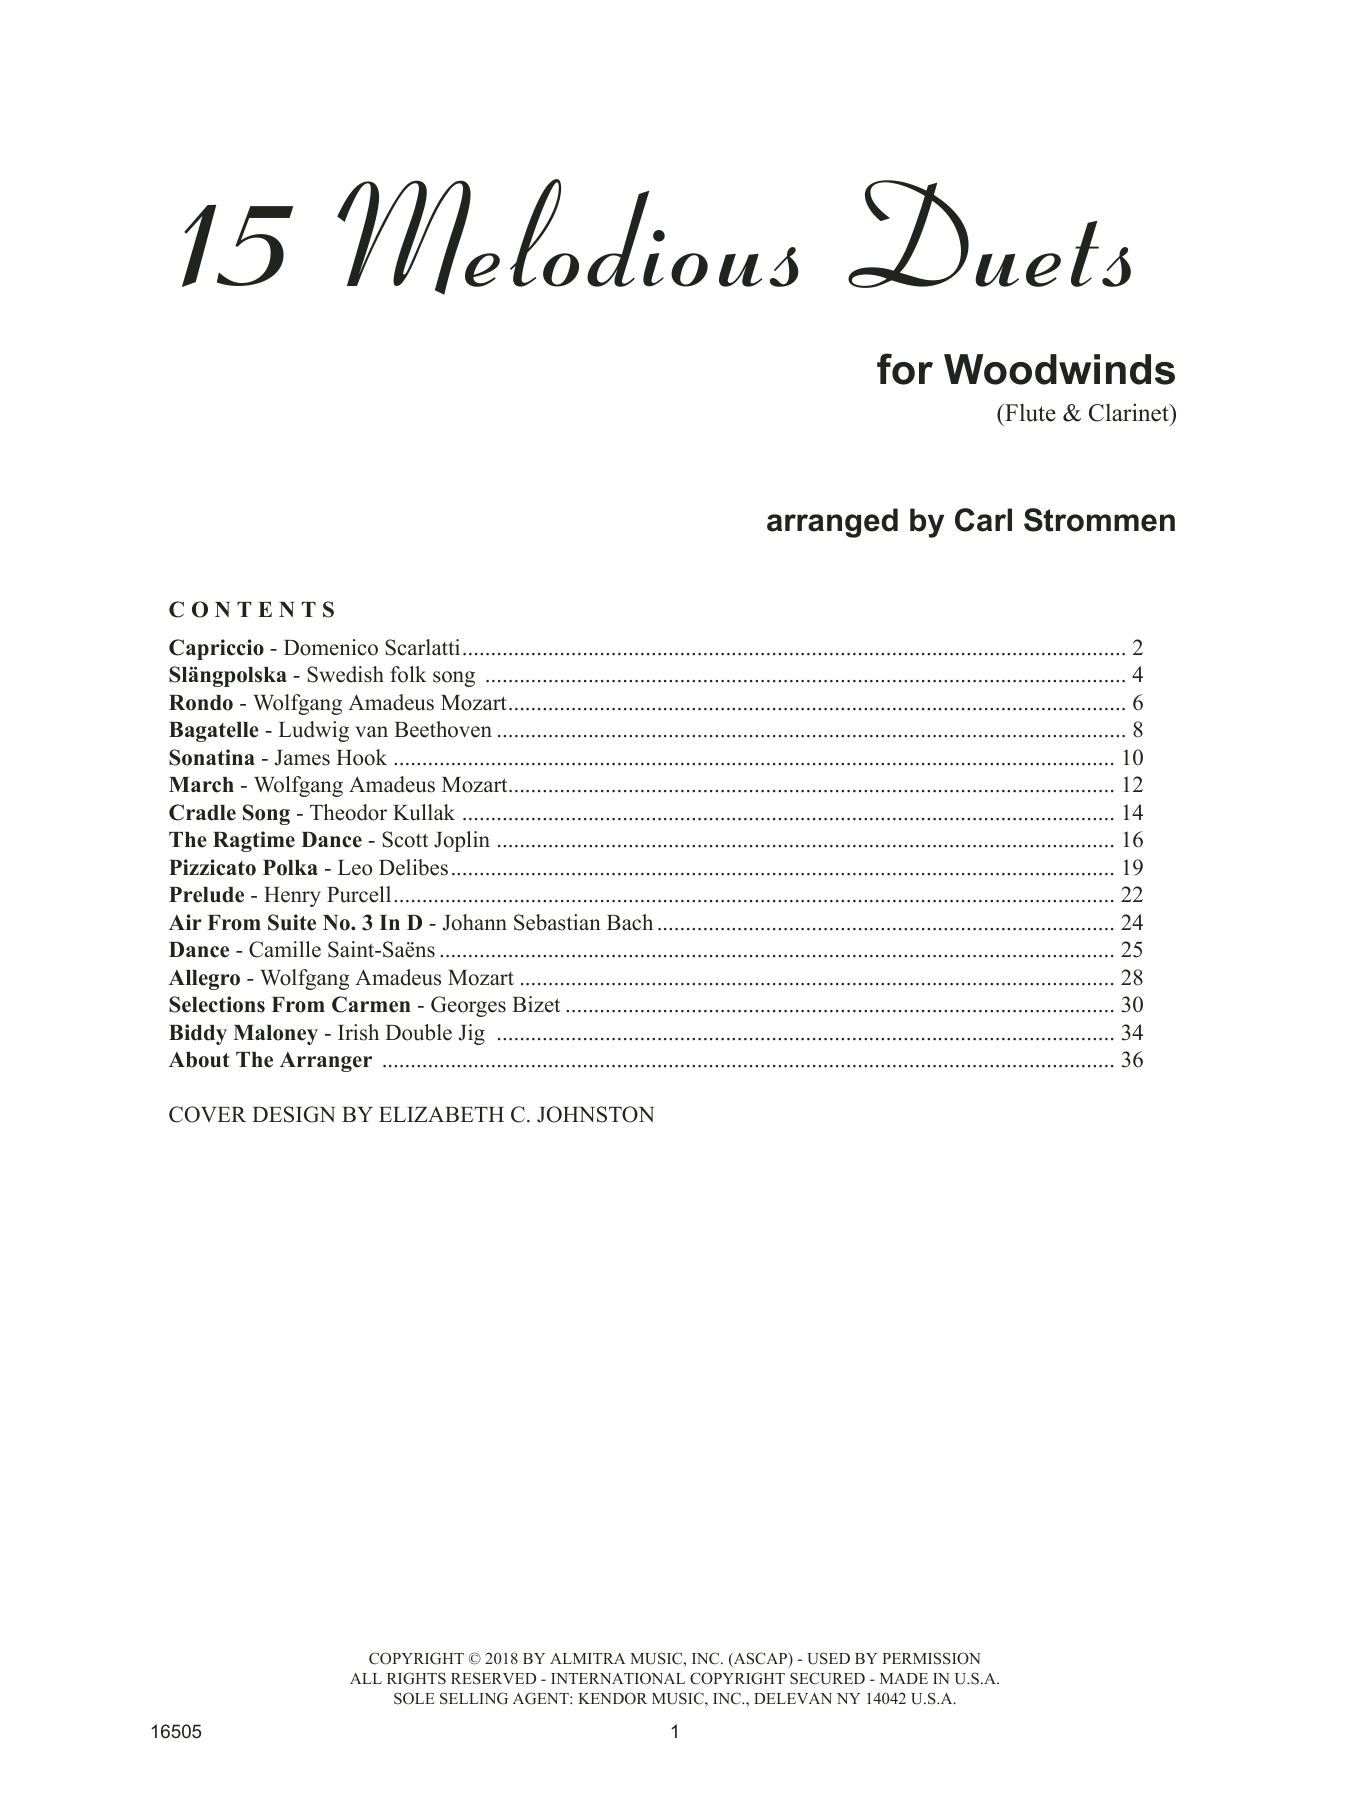 Carl Strommen 15 Melodious Duets sheet music notes and chords. Download Printable PDF.